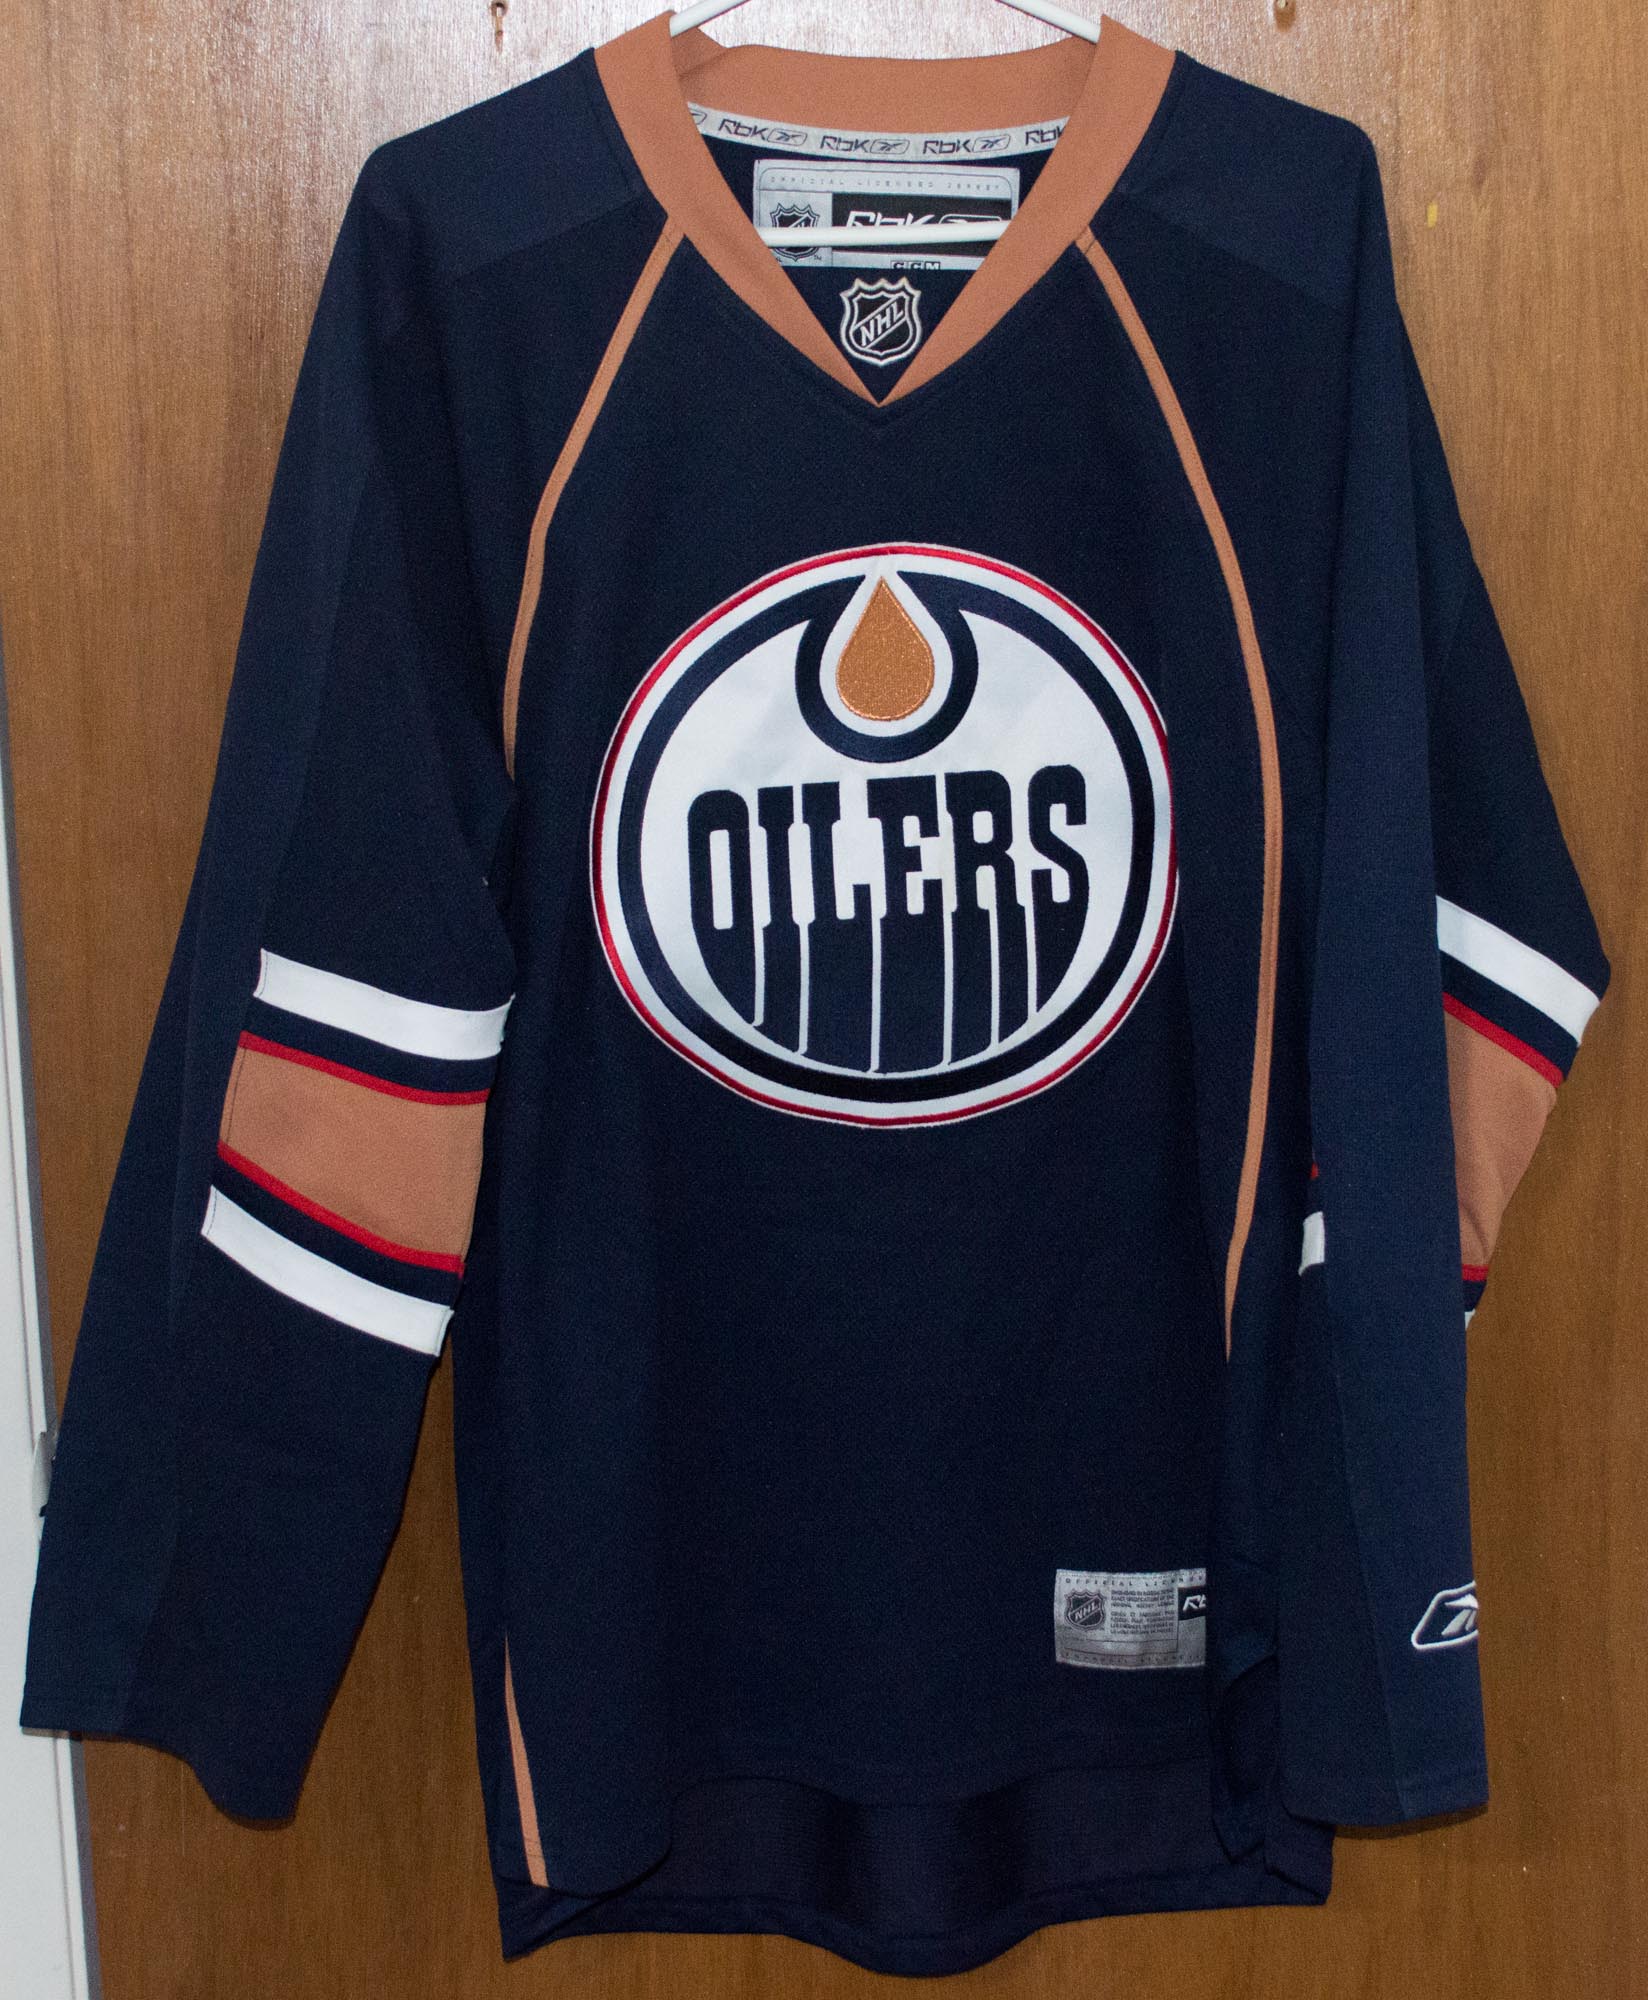 oilers old jersey